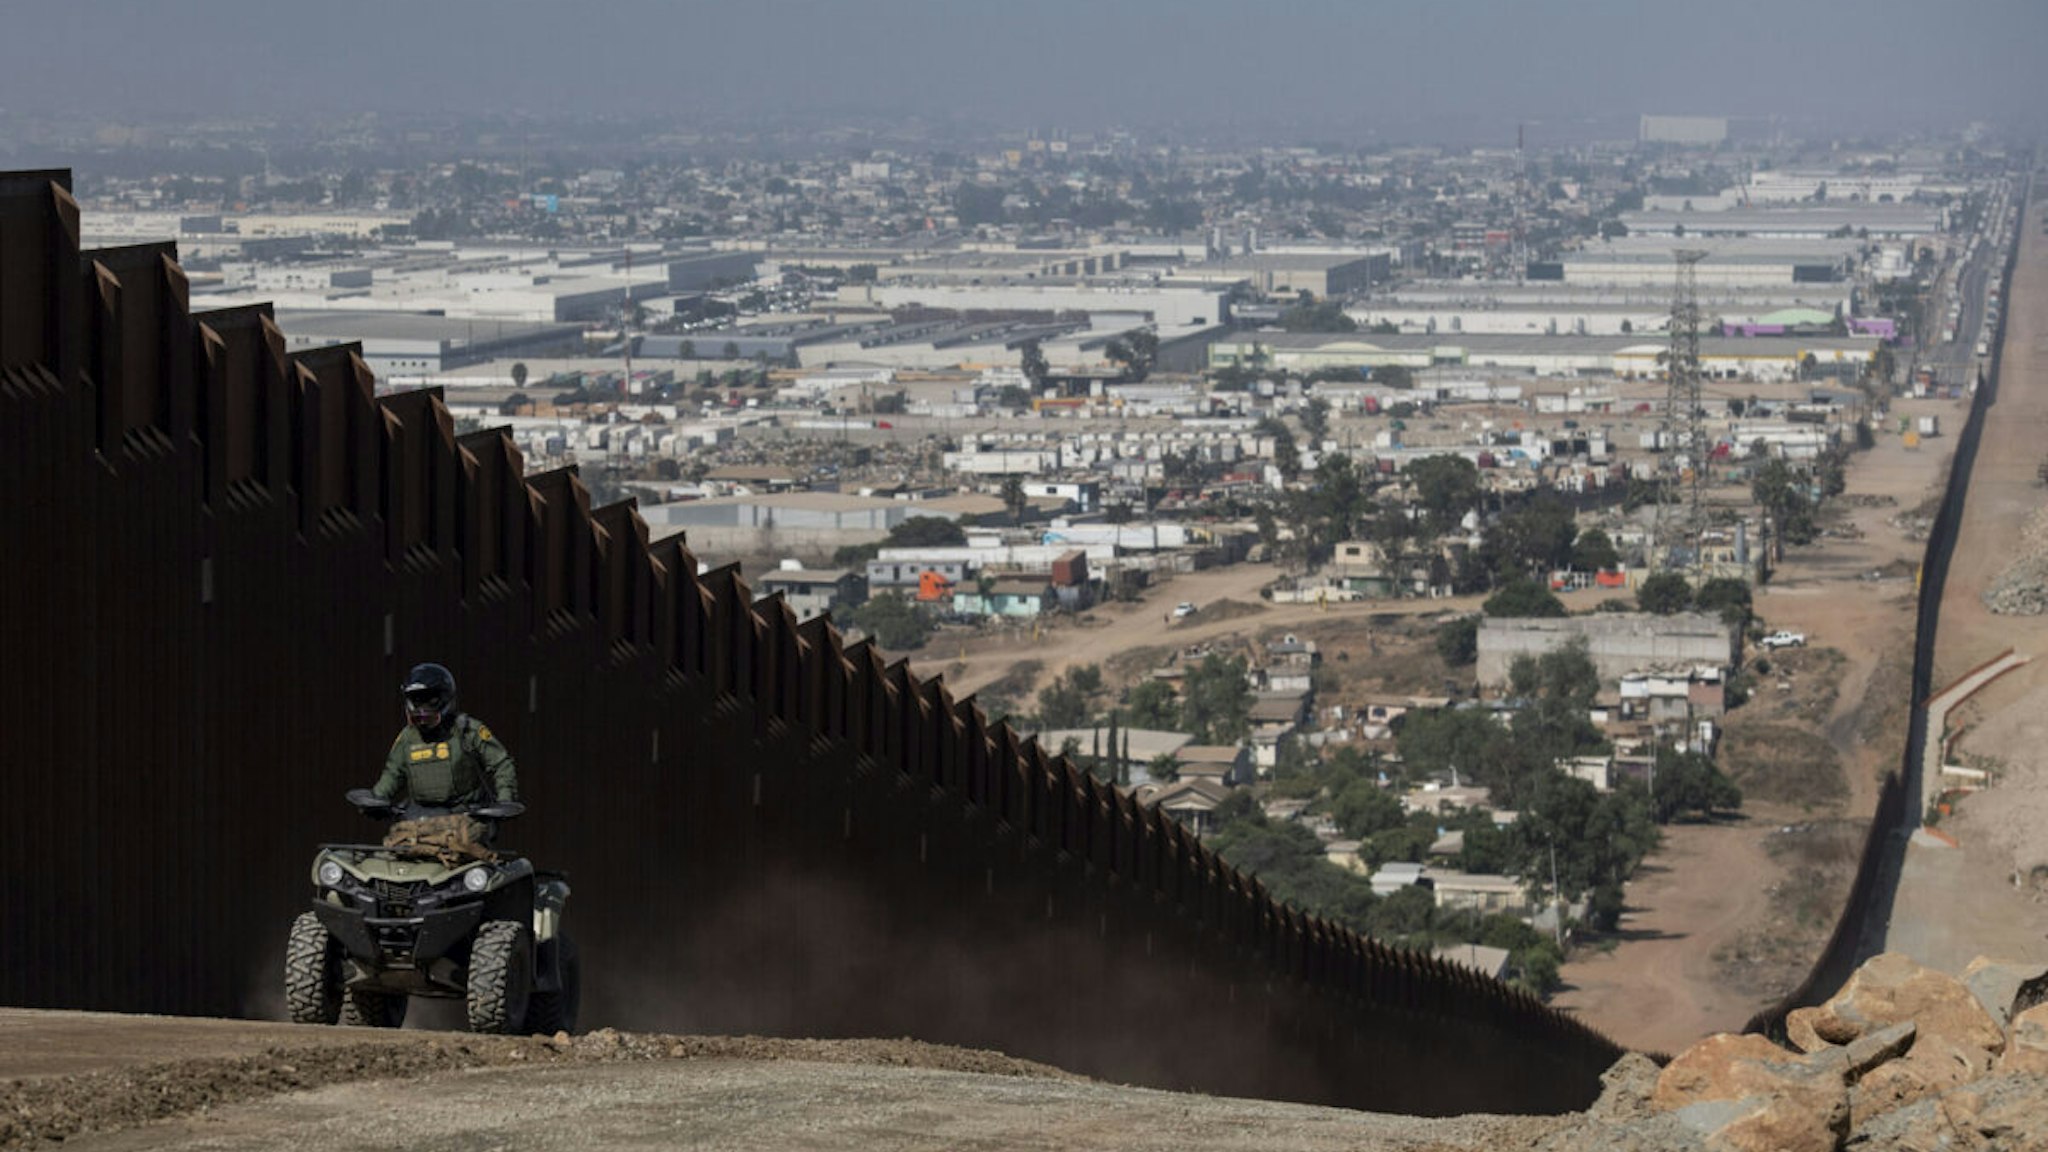 SAN DIEGO, CA - AUGUST 22: A border patrol agent patrols along a construction site for the secondary border fence which follows the length of the primary border fence that separates the United States and Mexico in the San Diego Sector on August 22, 2019 in San Diego, CA.